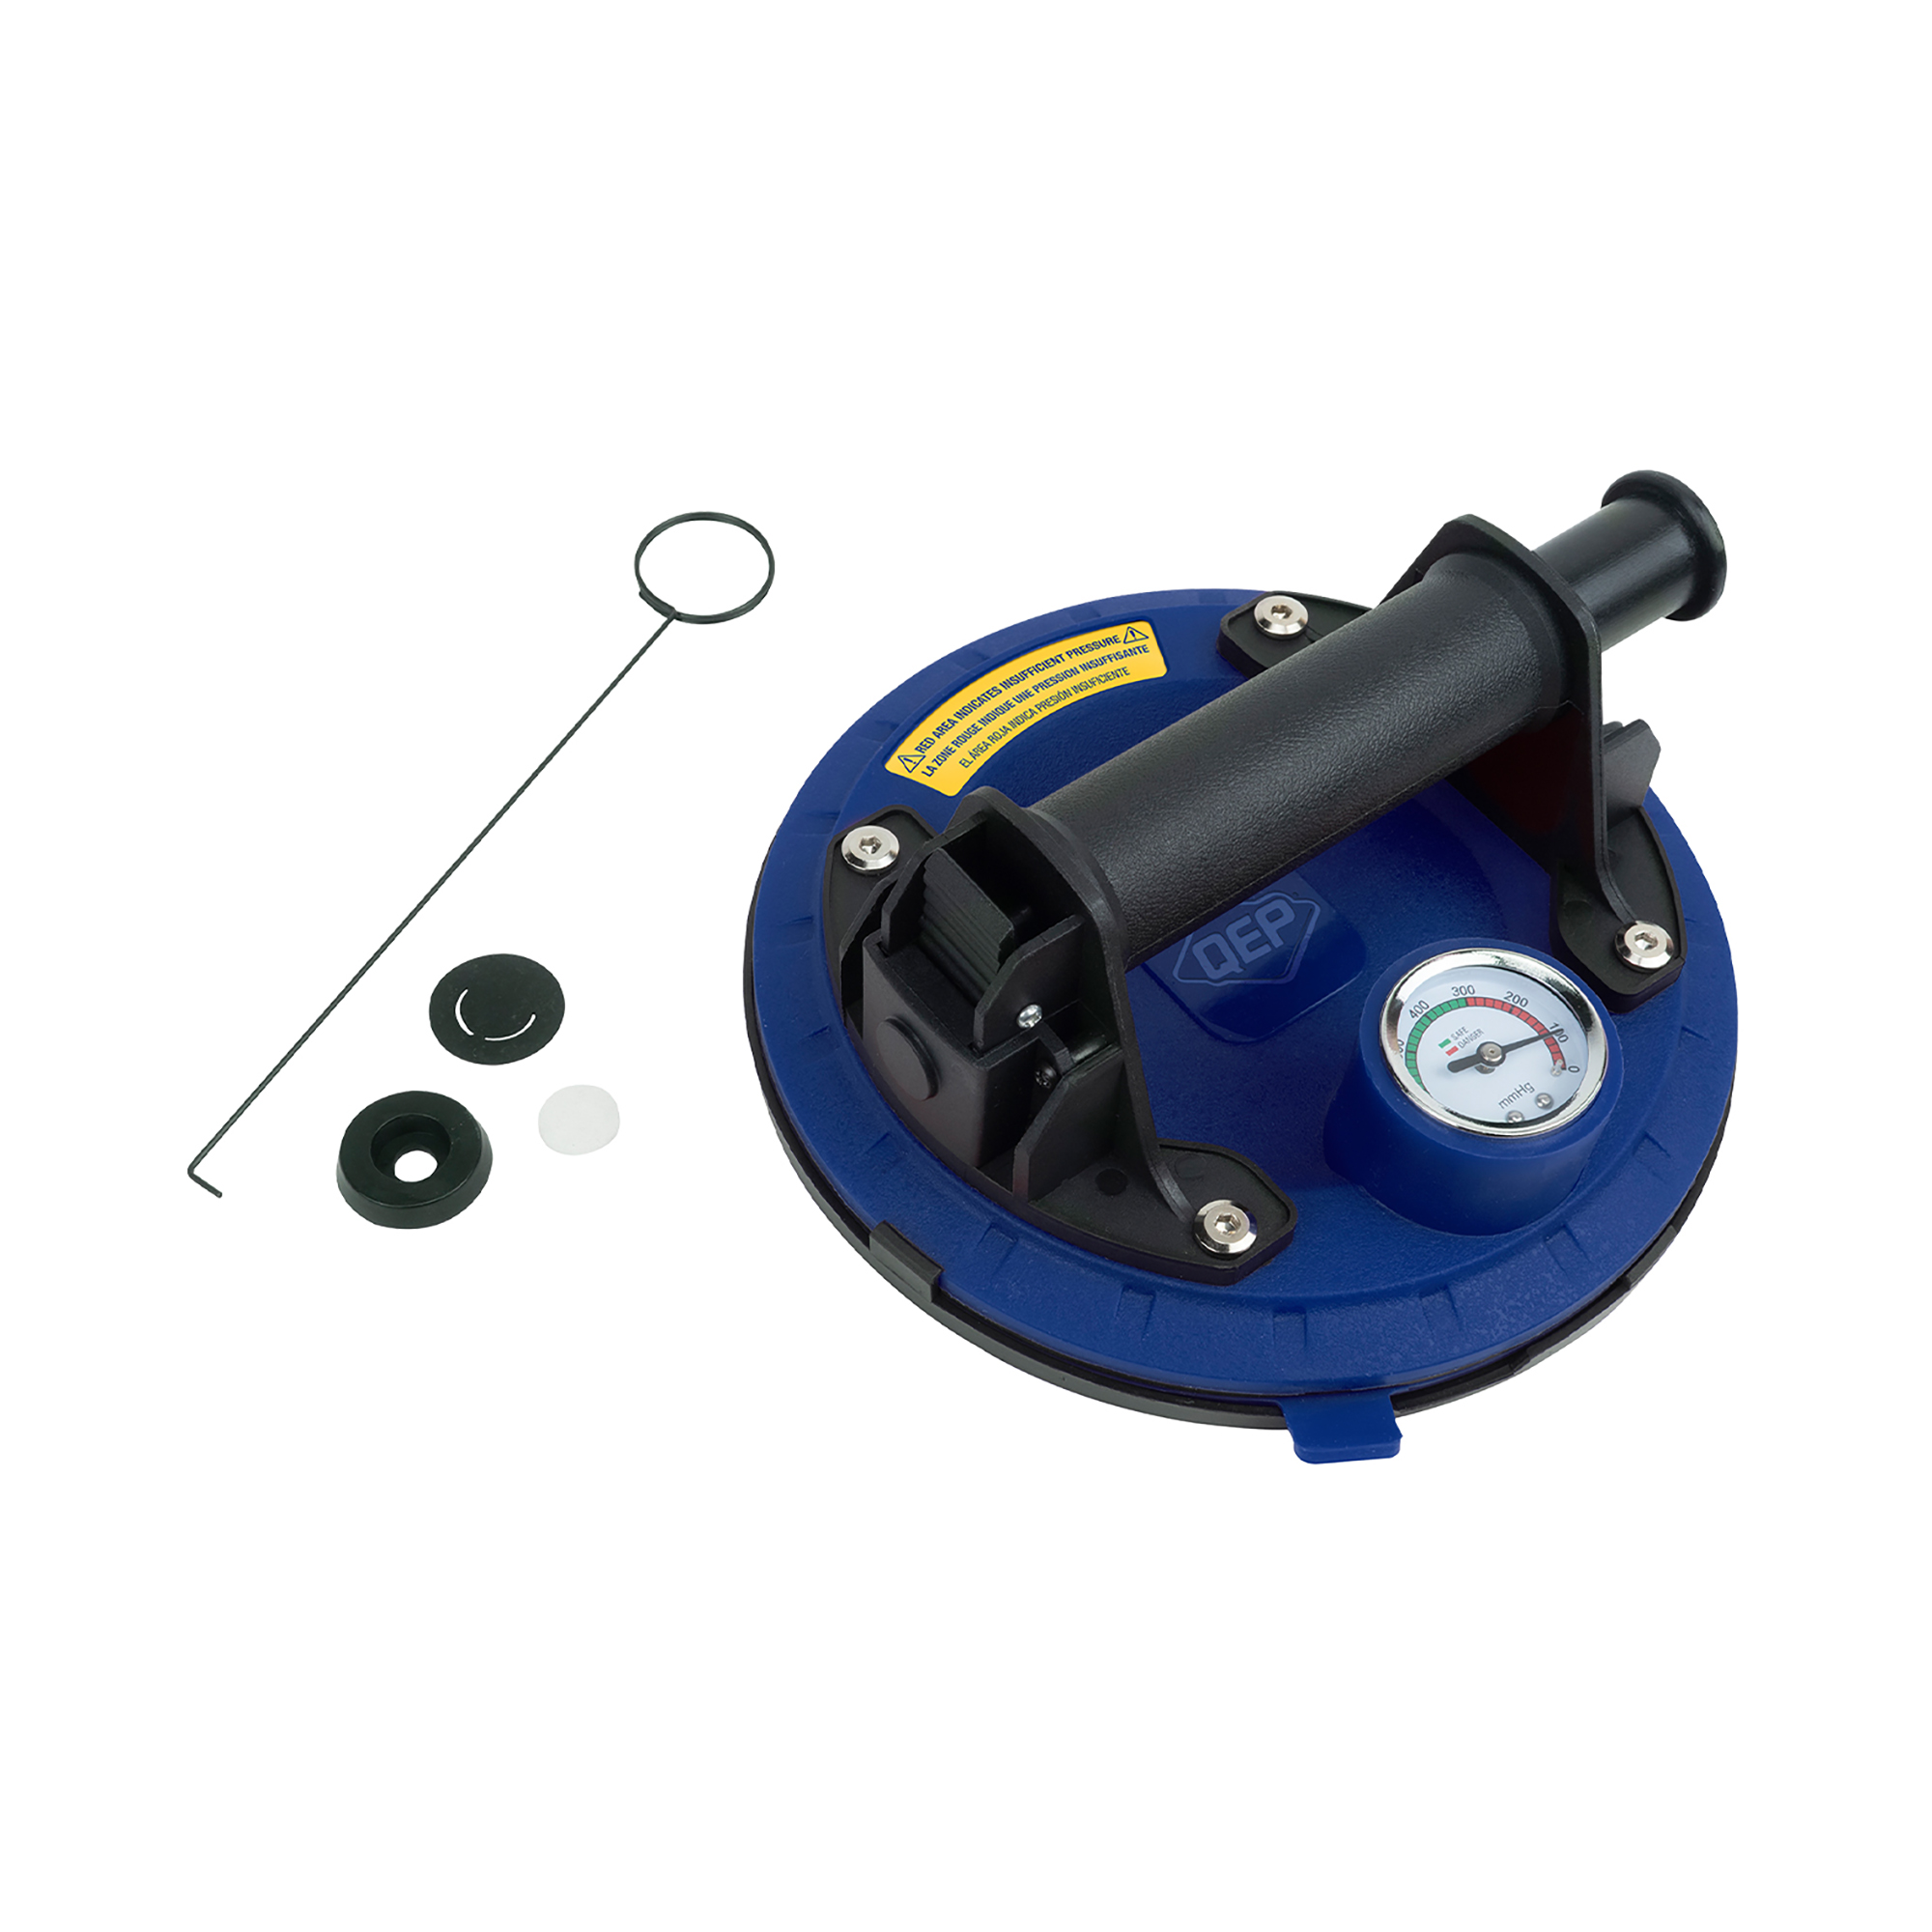 8" Vacuum Pump Suction Cup with Gauge